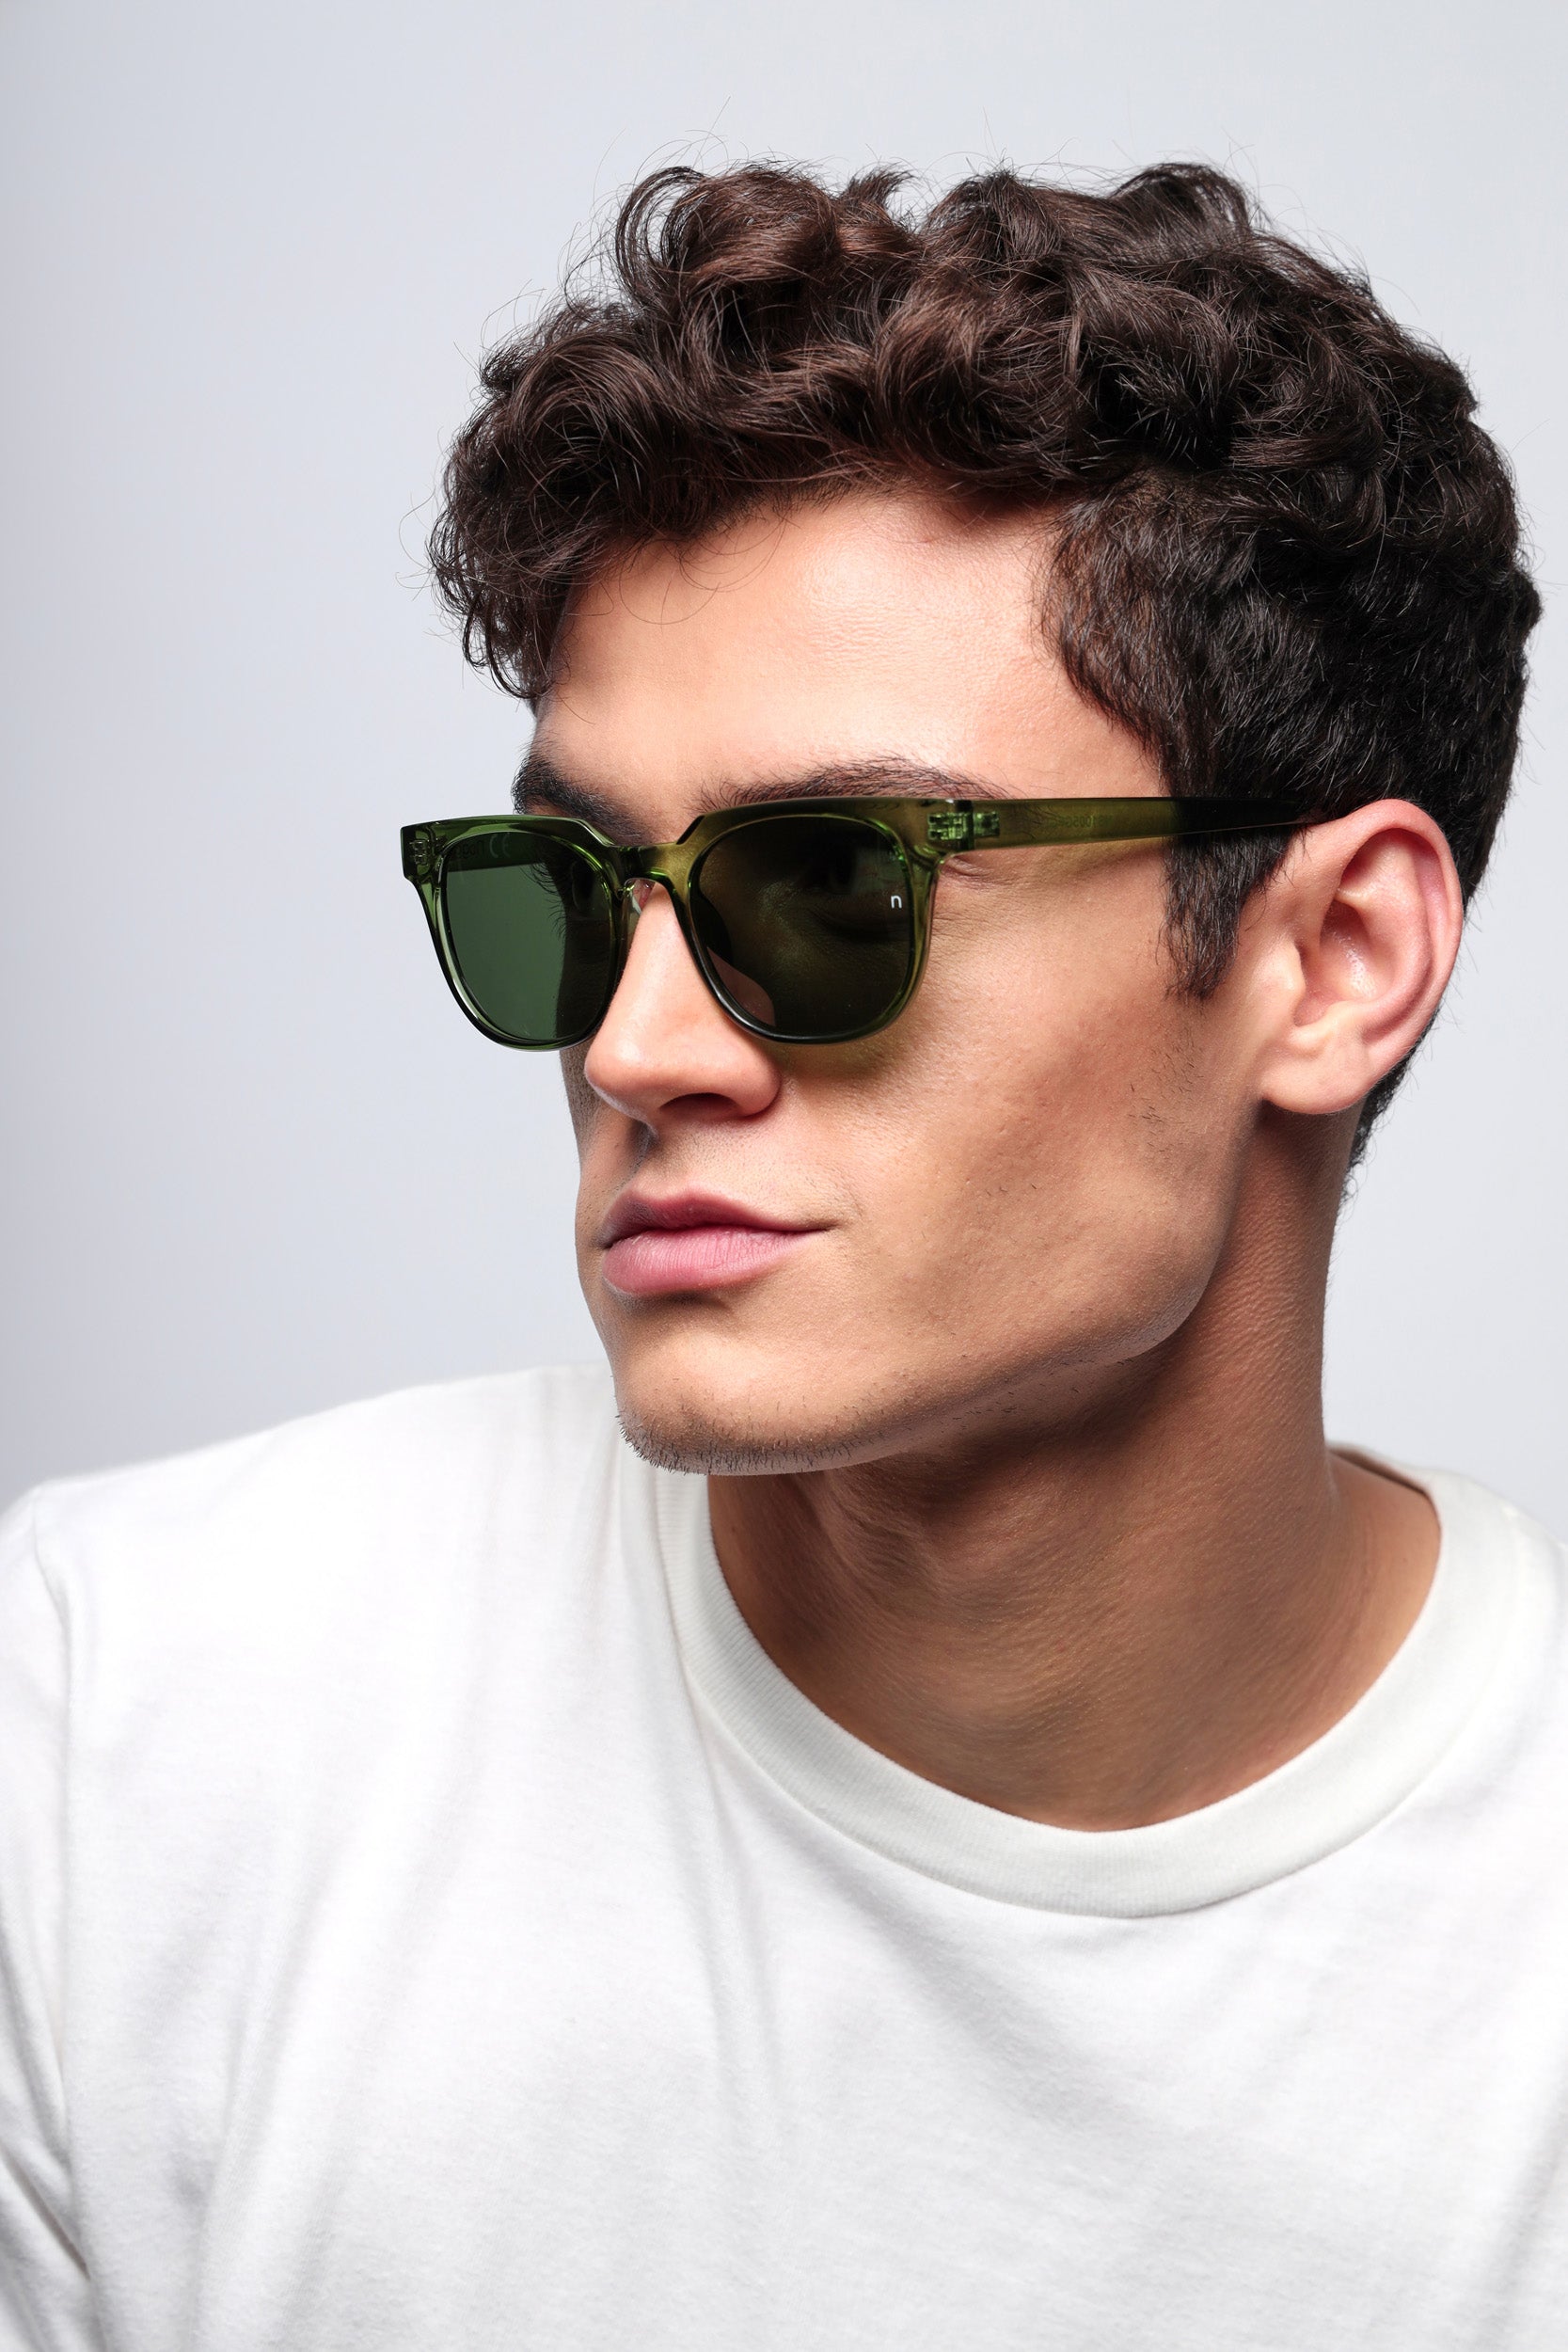 Share more than 197 discount sunglasses